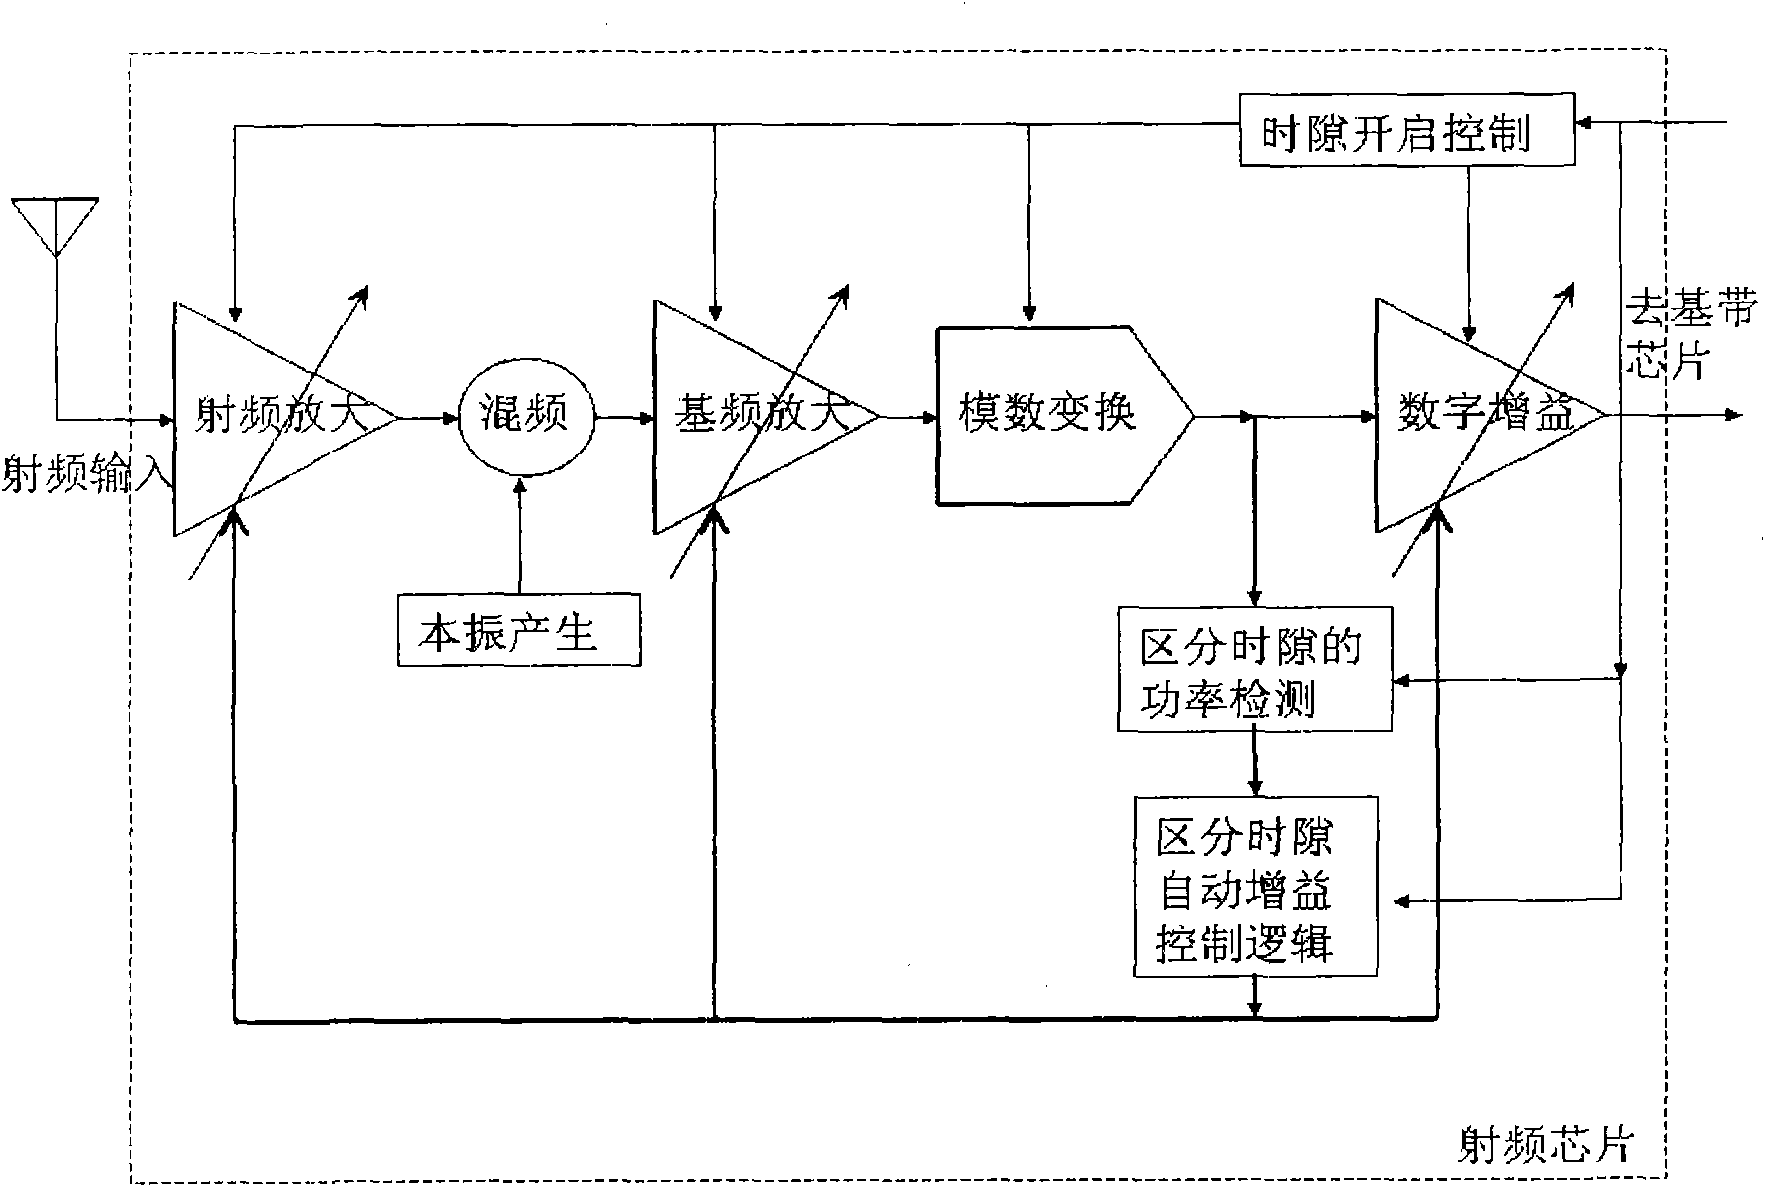 Automatic gain control (AGC) method of radio frequency loop of TD-SCDMA (Time Division-Synchronization Code Division Multiple Access) terminal